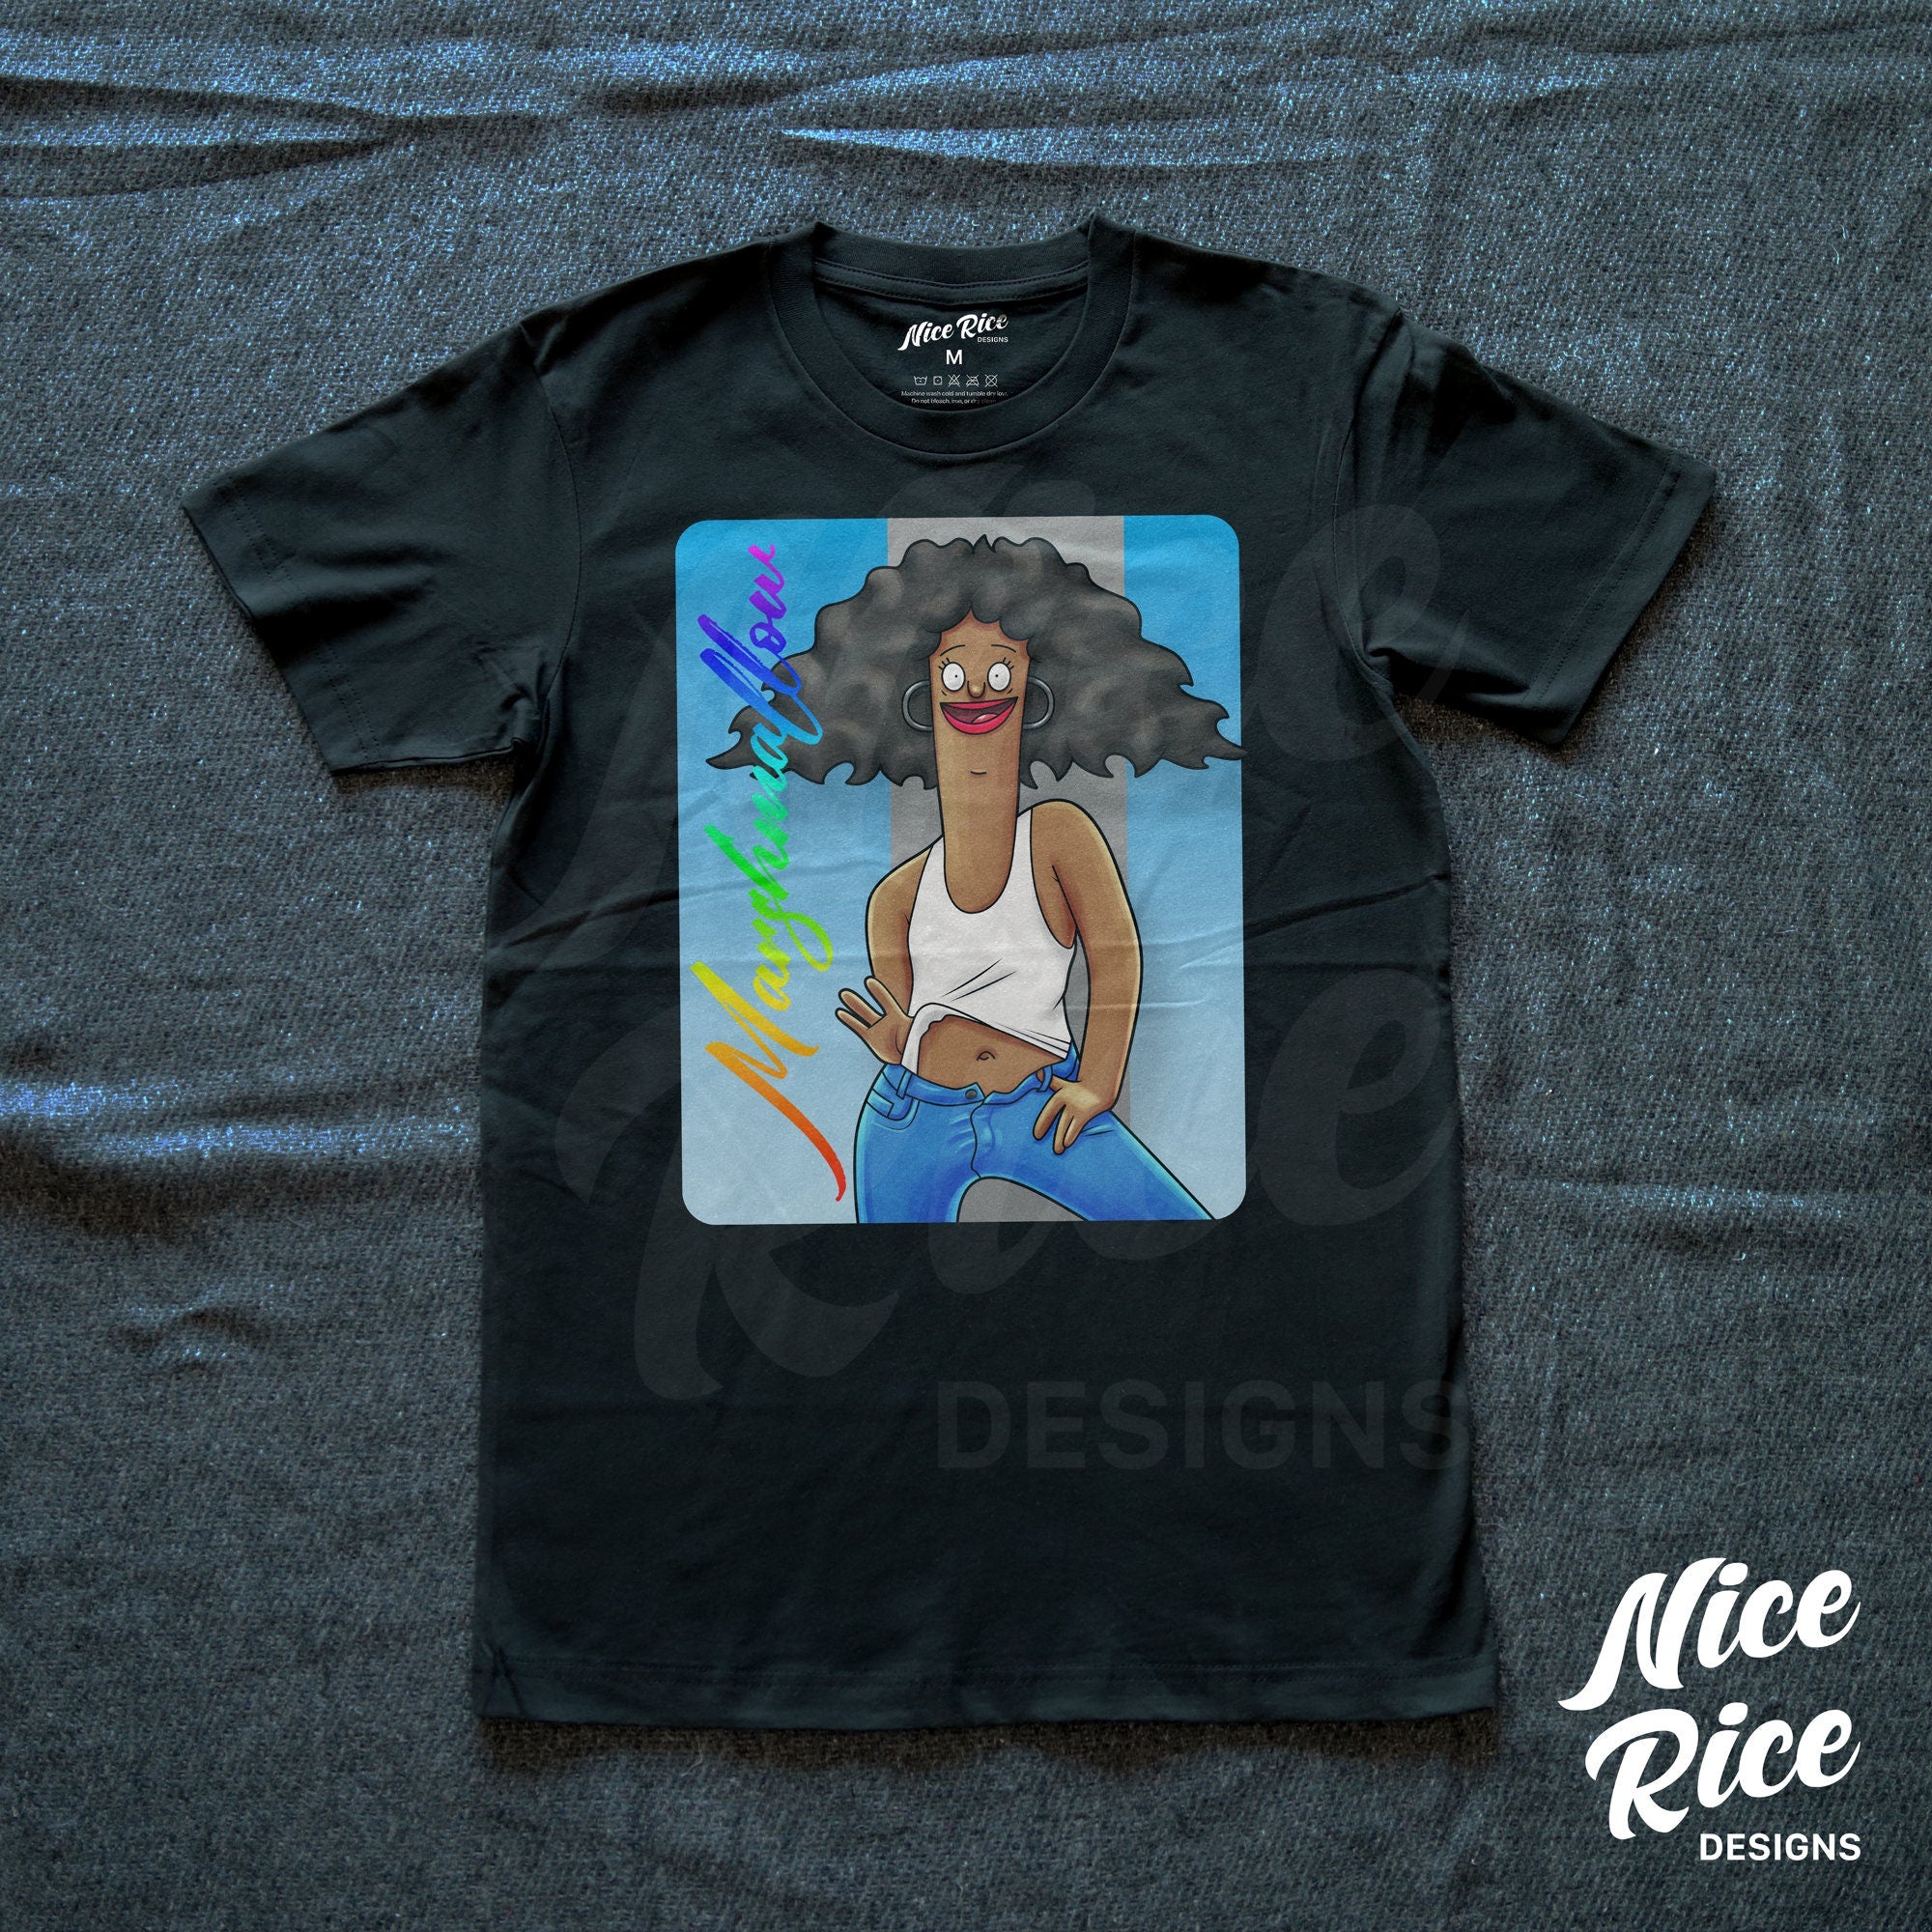 I Wanna Dance with Marshmallow Shirt by Nice Rice Designs